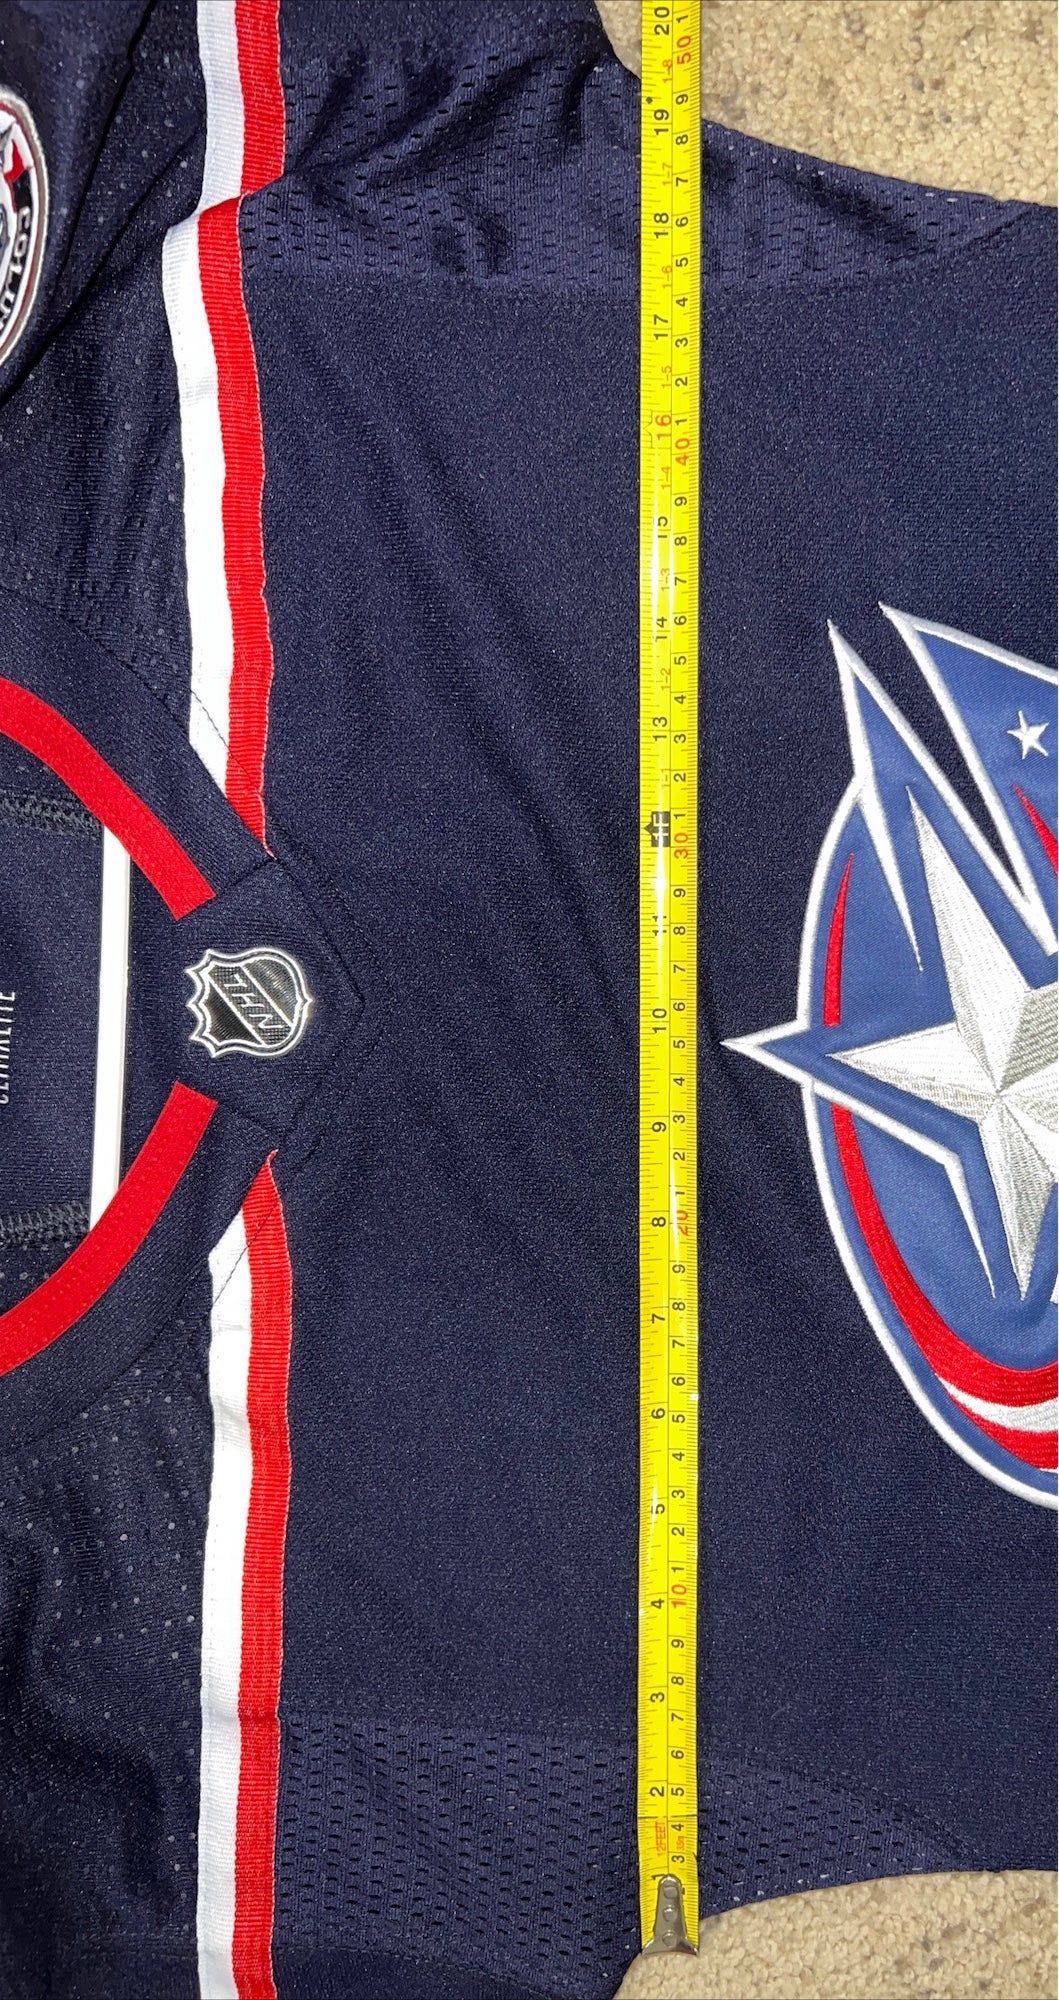 Adidas Columbus Blue Jackets Authentic Climalite NHL Jersey - Home - Adult